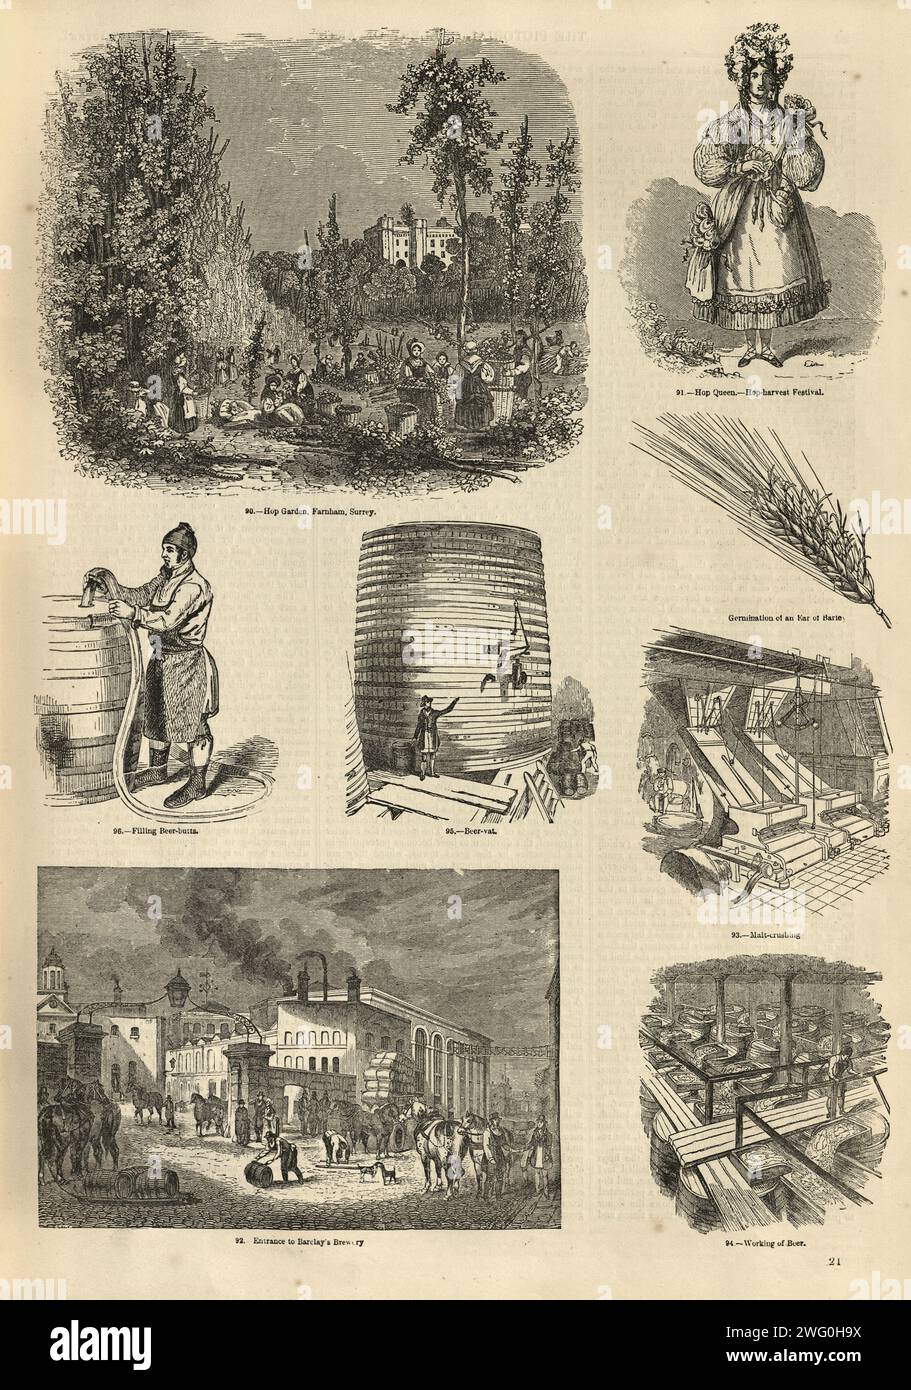 Page of old illustrations about the beer brewing industry, Hop garden, Beer Vat, Brewery, 1850s 19th Century Stock Photo